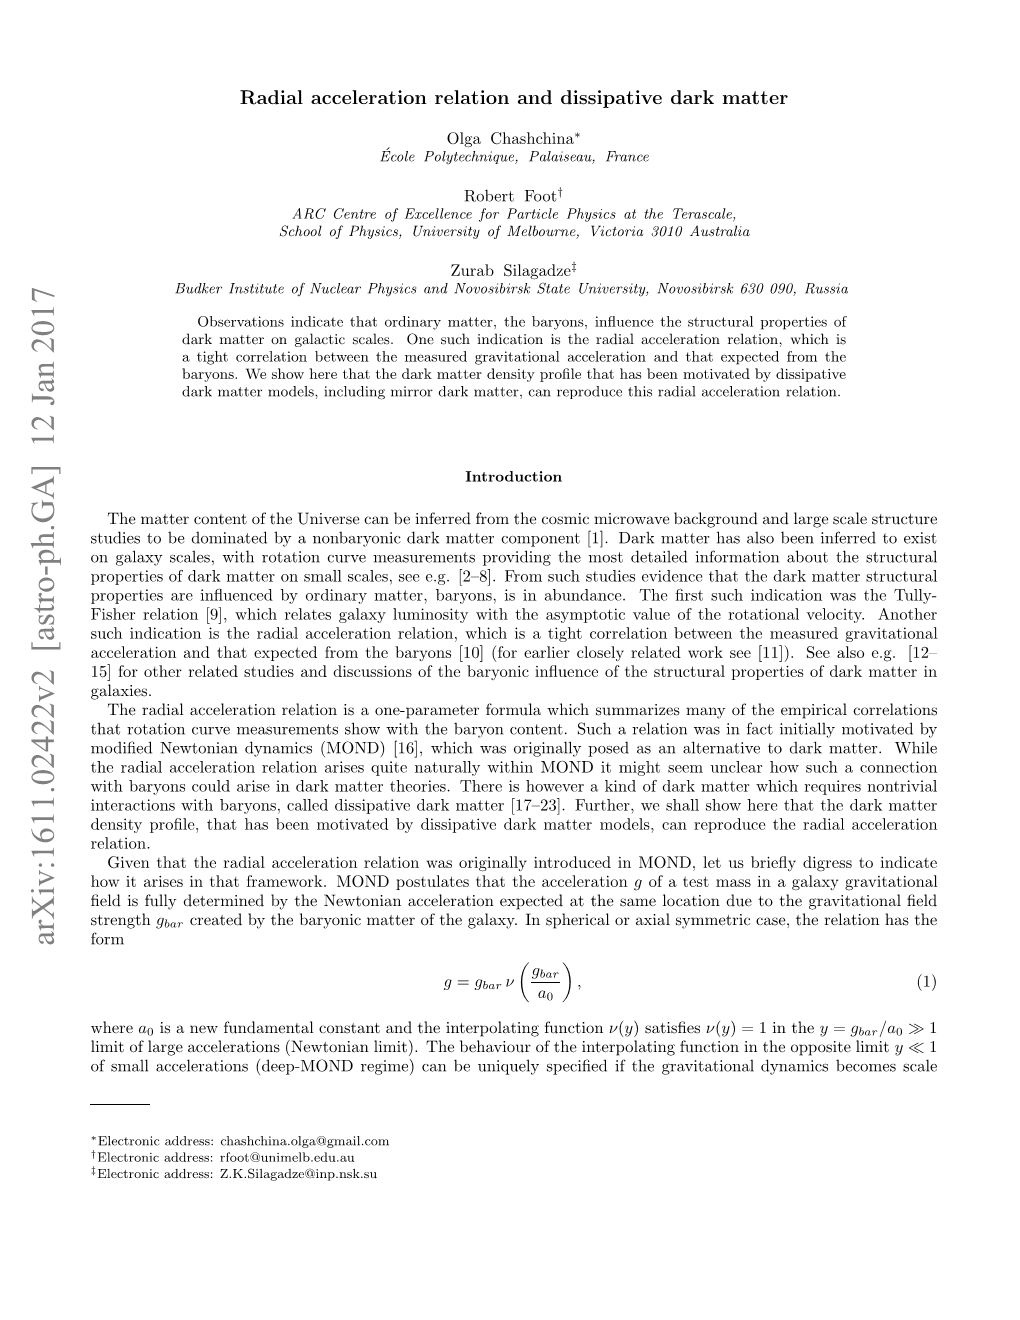 Radial Acceleration Relation and Dissipative Dark Matter